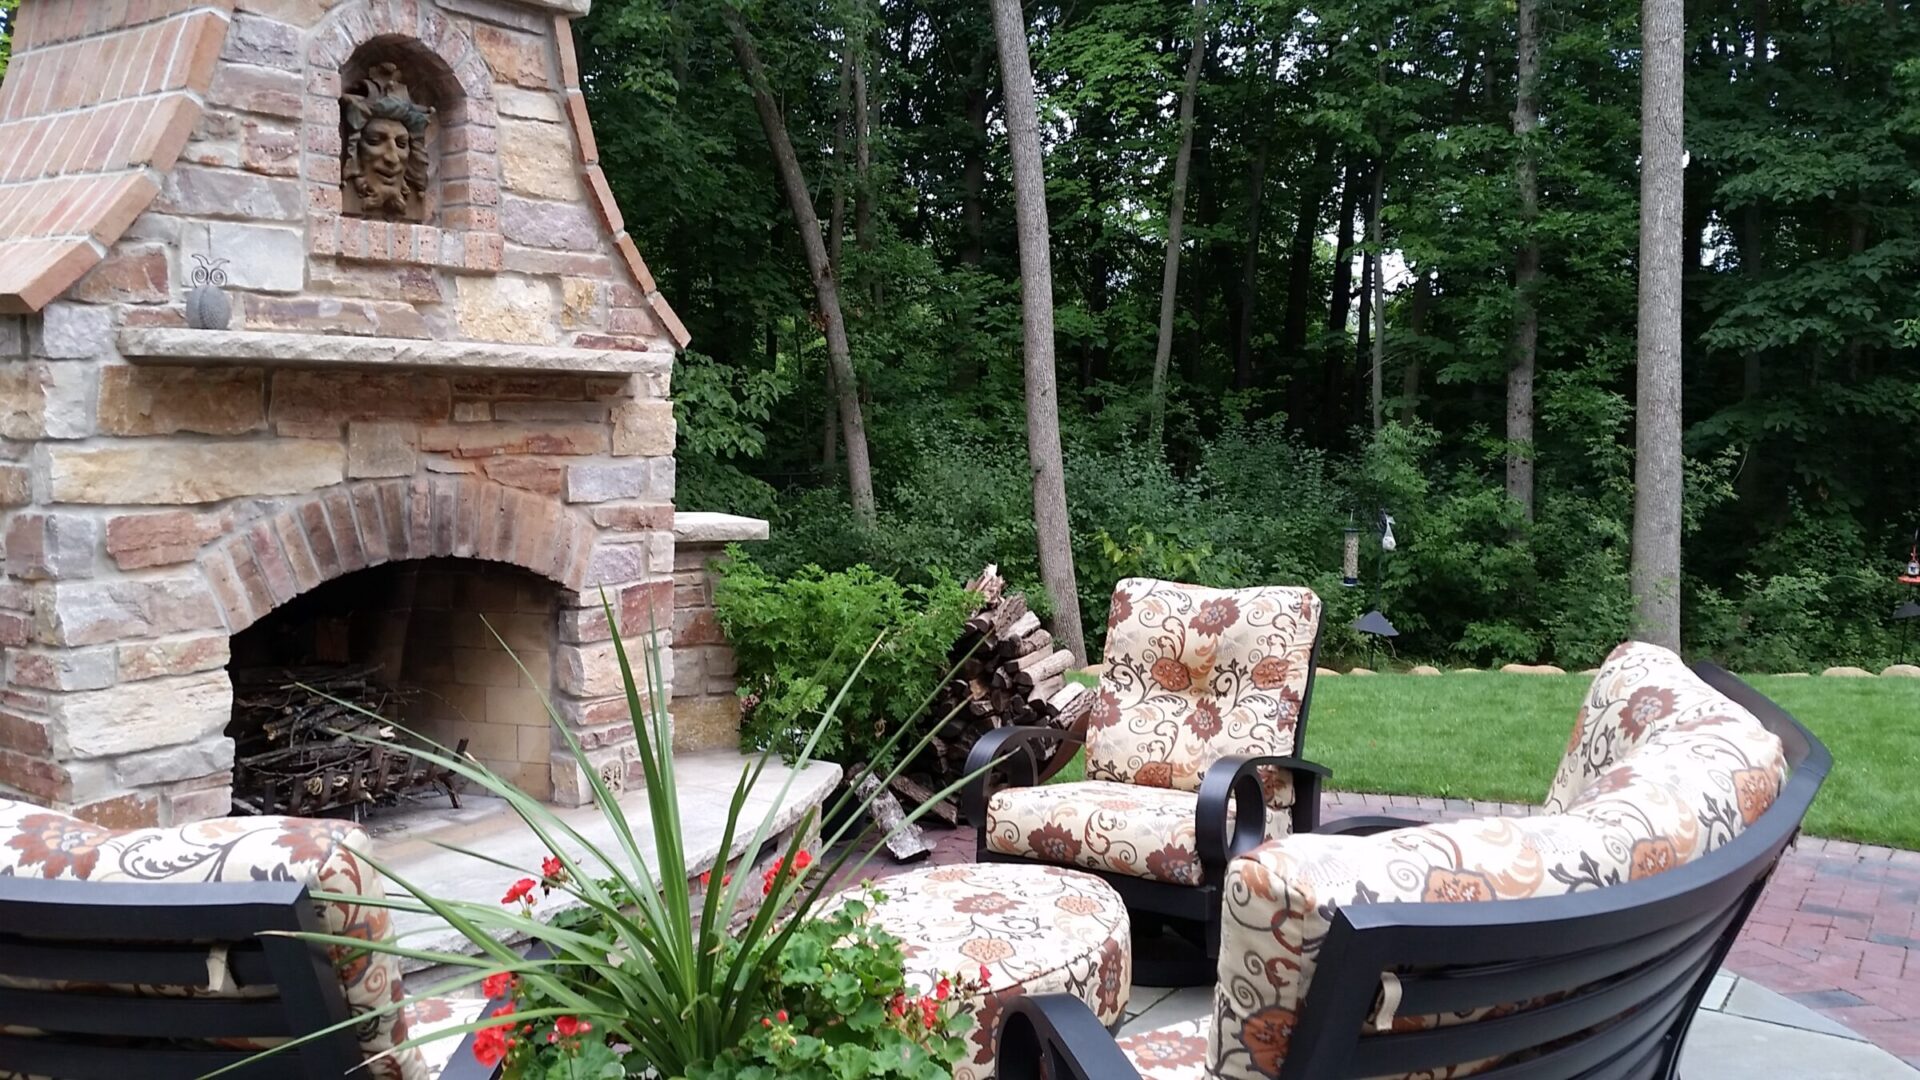 An outdoor stone fireplace with a wood pile is surrounded by patterned upholstered chairs. Lush greenery and trees create a tranquil backyard setting.